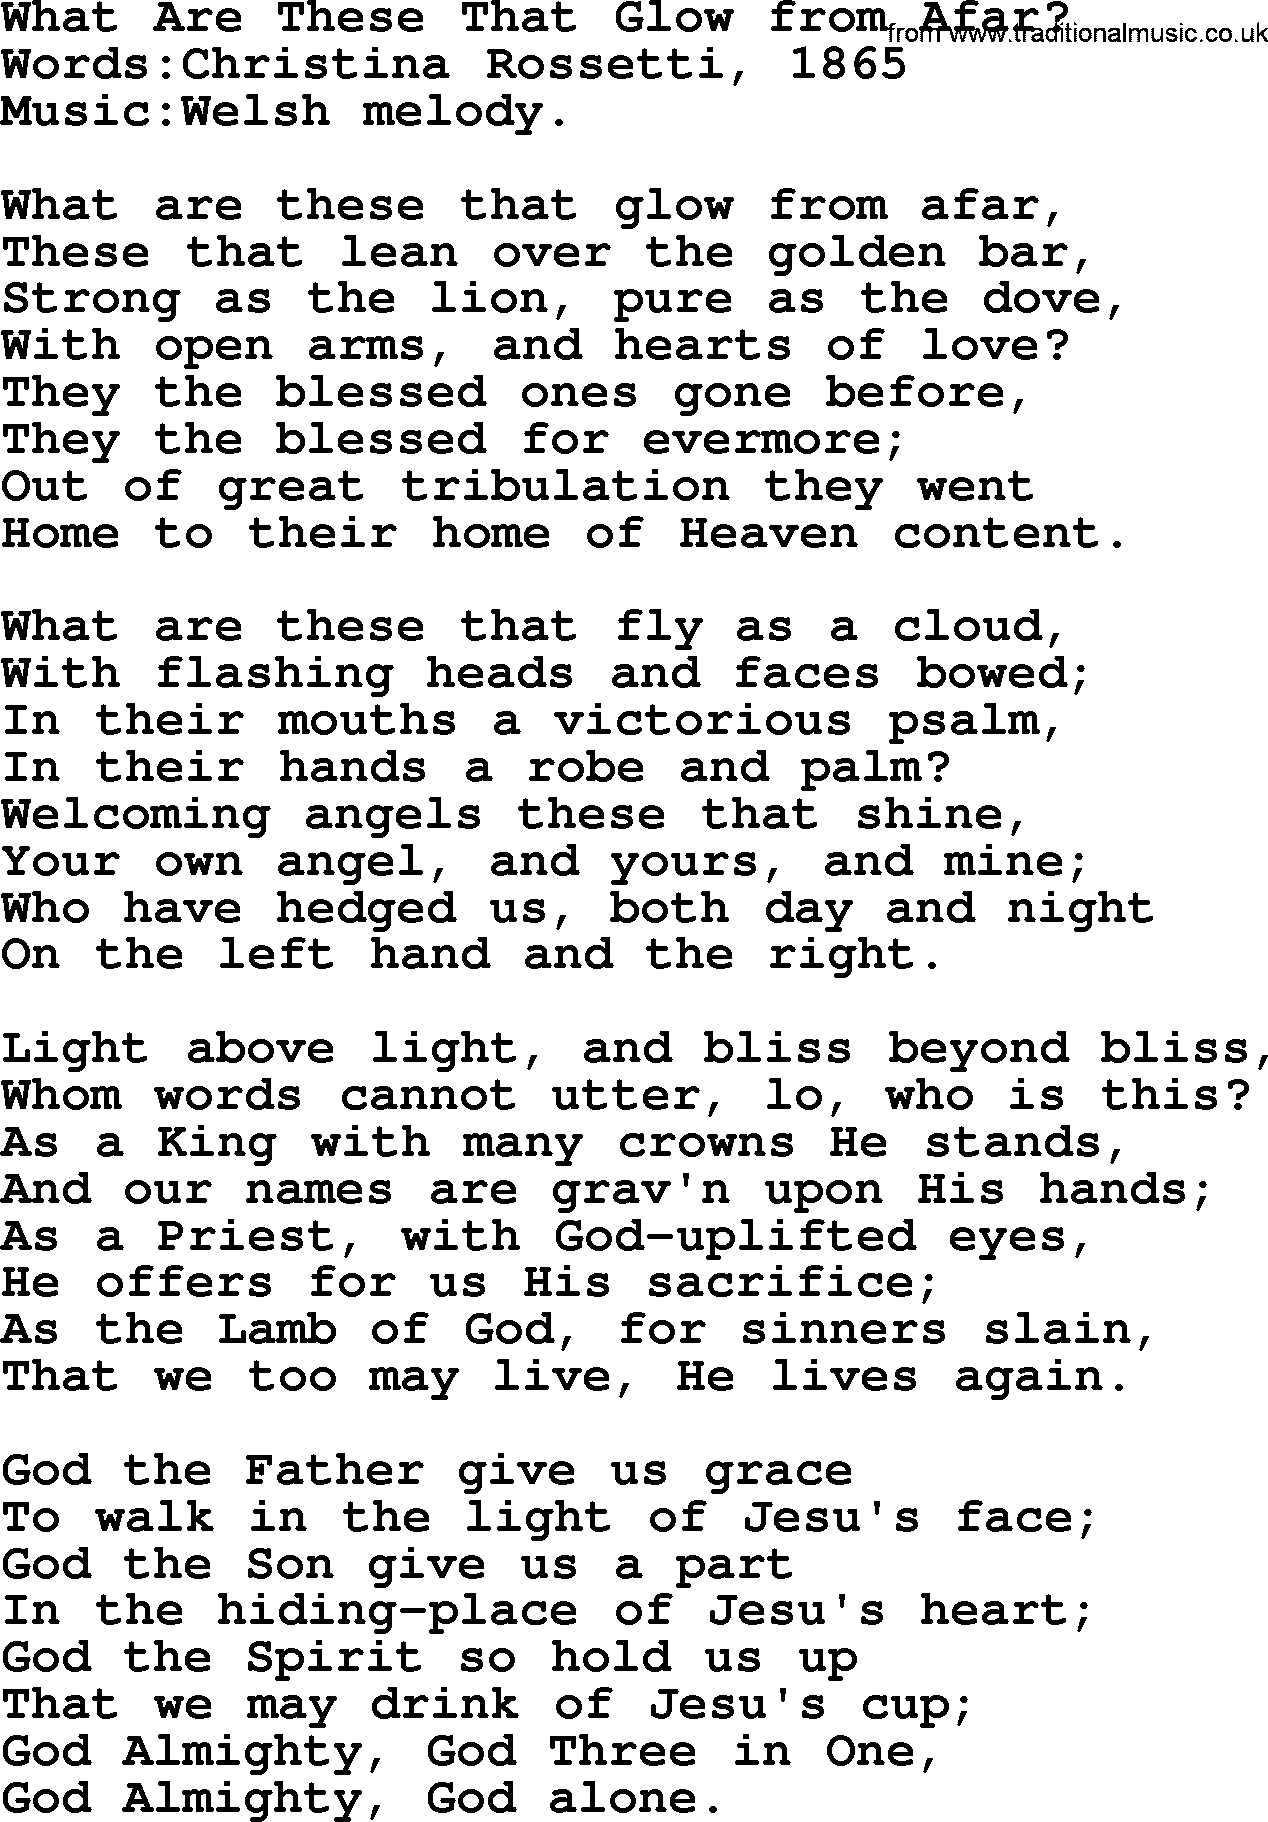 Songs and Hymns about Heaven: What Are These That Glow From Afar lyrics with PDF